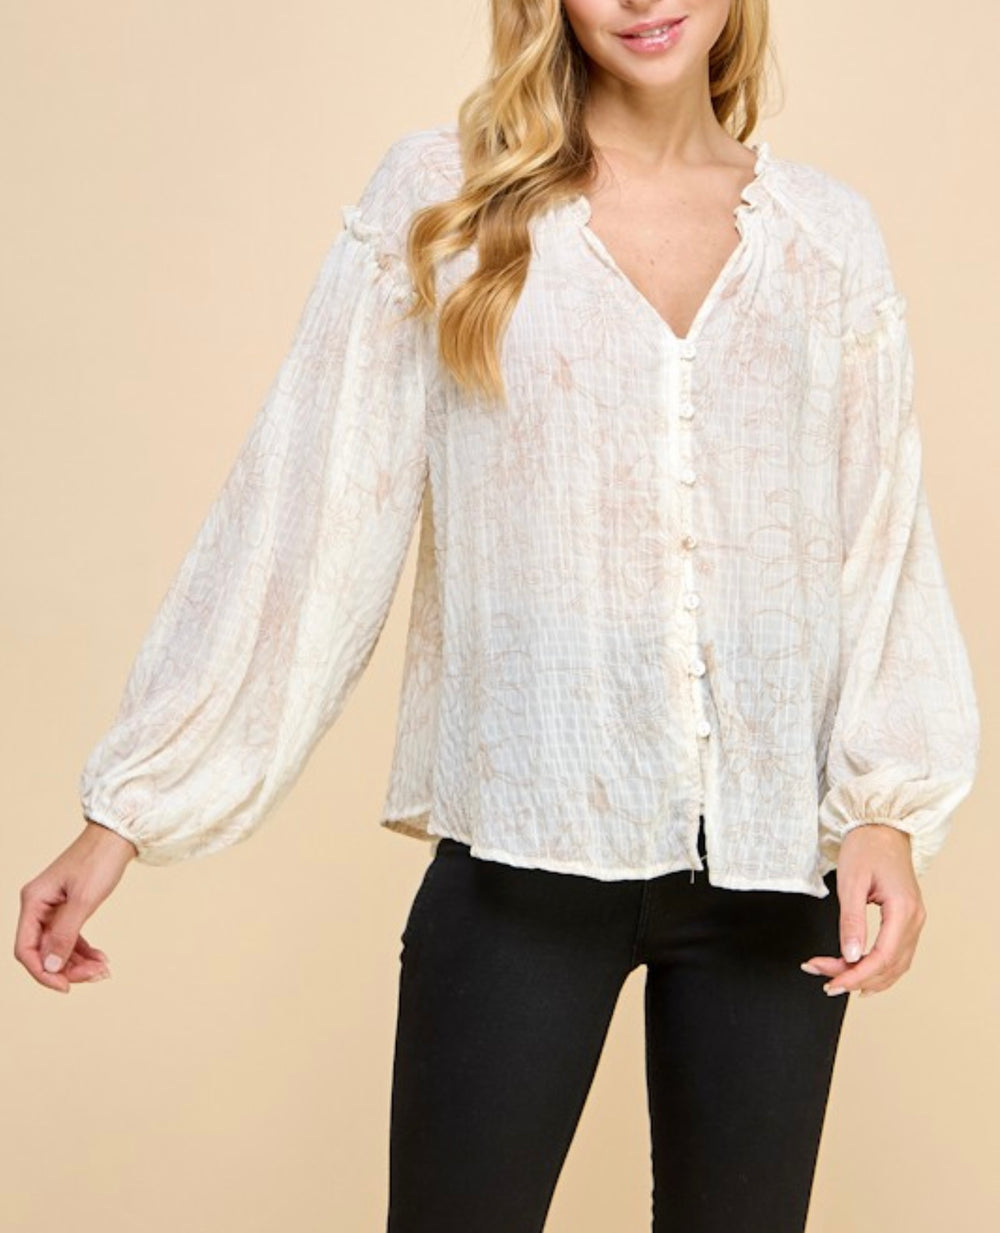 Crinckled Floral Boho Blouse in Off White/Taupe